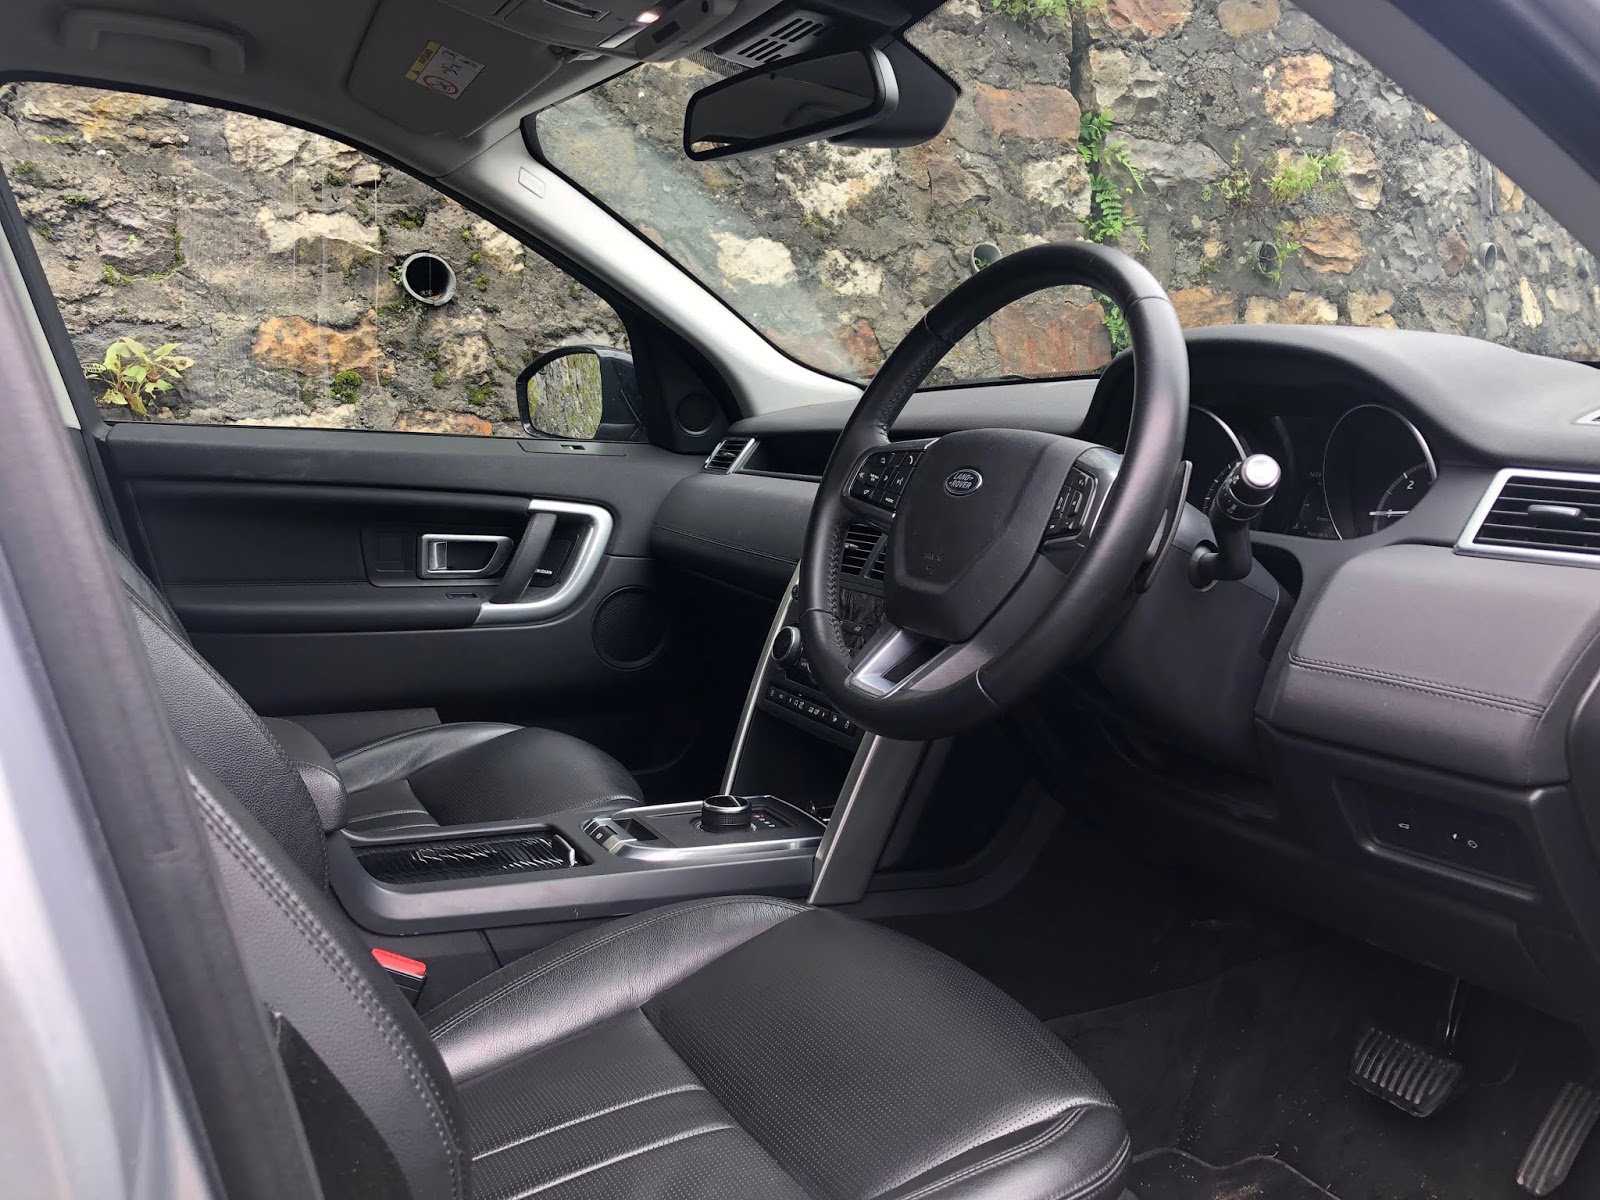 Interiors of the Discovery Sport